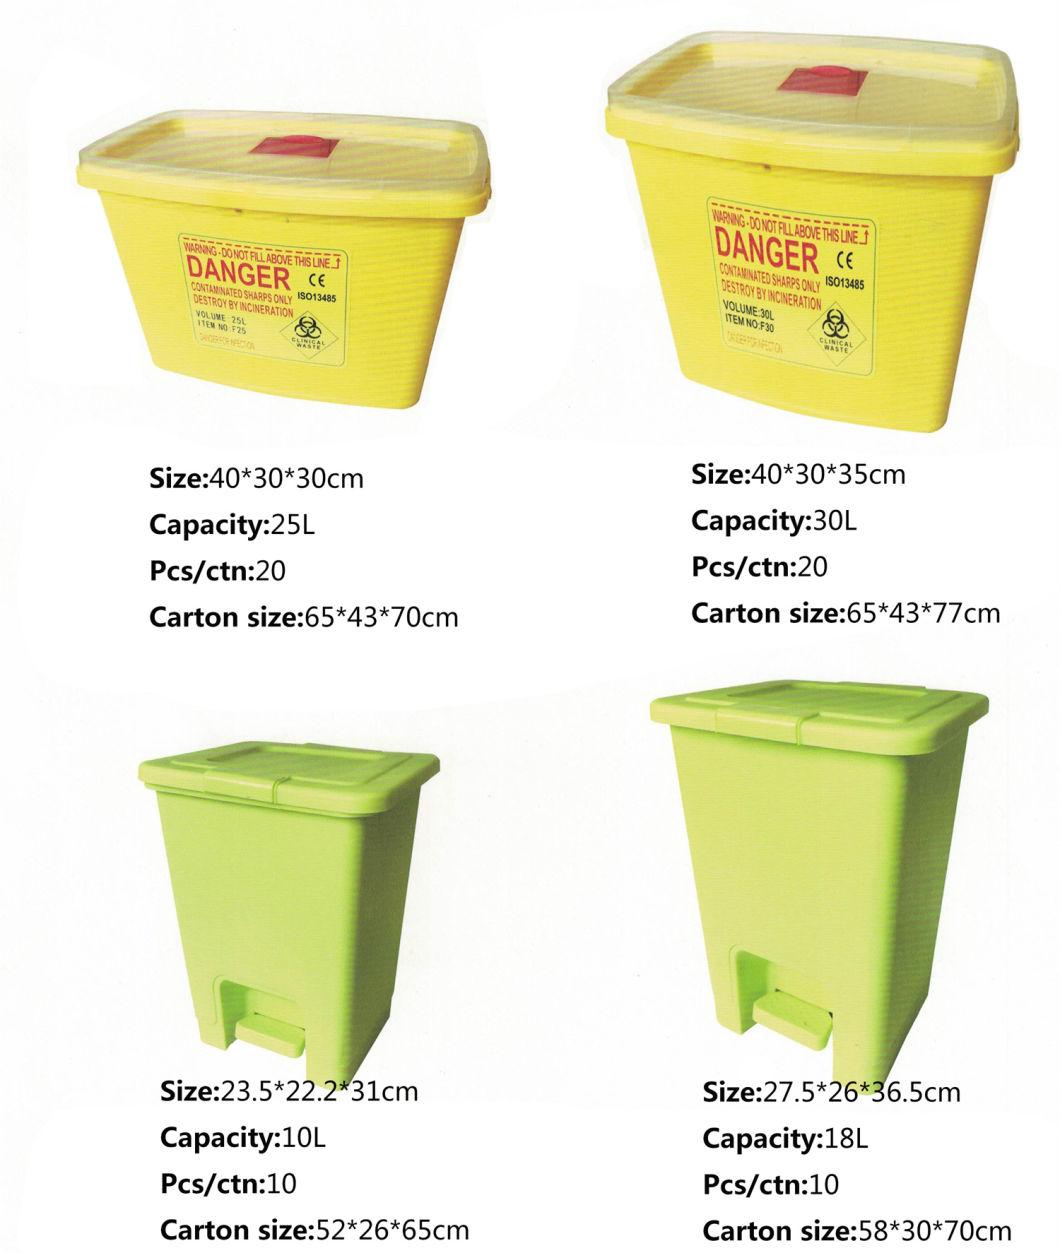 PP Plastic Safety Box Biohazard Needle Sharps Disposal Syringe Container Bin with Handle